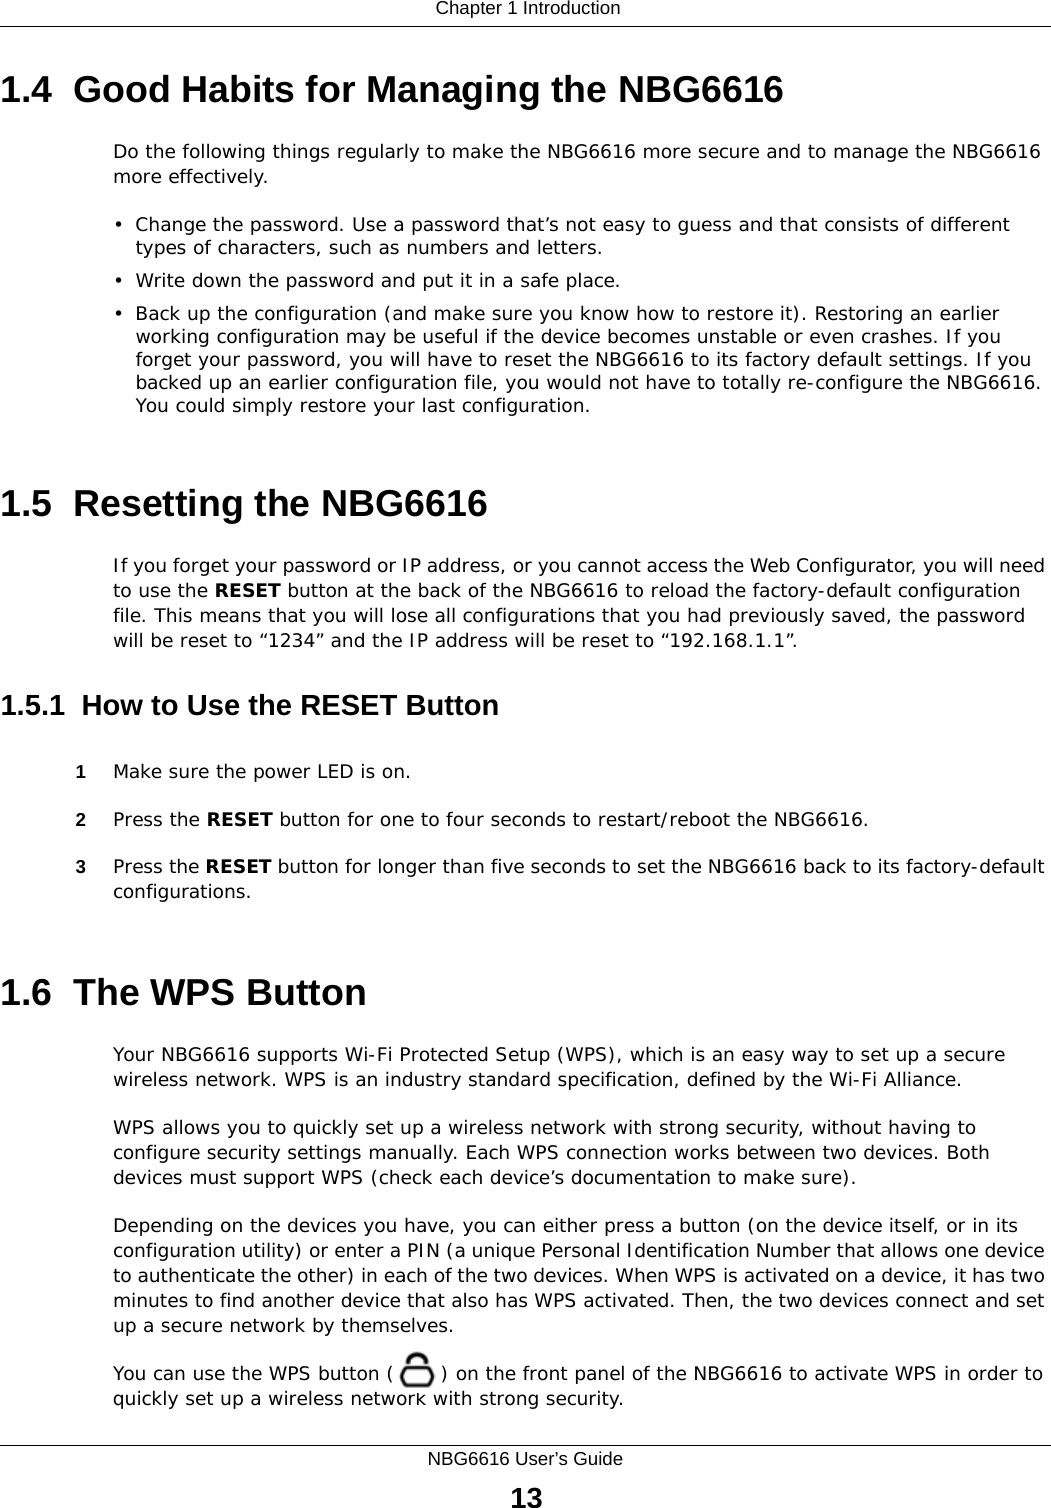  Chapter 1 IntroductionNBG6616 User’s Guide131.4  Good Habits for Managing the NBG6616Do the following things regularly to make the NBG6616 more secure and to manage the NBG6616 more effectively.• Change the password. Use a password that’s not easy to guess and that consists of different types of characters, such as numbers and letters.• Write down the password and put it in a safe place.• Back up the configuration (and make sure you know how to restore it). Restoring an earlier working configuration may be useful if the device becomes unstable or even crashes. If you forget your password, you will have to reset the NBG6616 to its factory default settings. If you backed up an earlier configuration file, you would not have to totally re-configure the NBG6616. You could simply restore your last configuration.1.5  Resetting the NBG6616If you forget your password or IP address, or you cannot access the Web Configurator, you will need to use the RESET button at the back of the NBG6616 to reload the factory-default configuration file. This means that you will lose all configurations that you had previously saved, the password will be reset to “1234” and the IP address will be reset to “192.168.1.1”.1.5.1  How to Use the RESET Button1Make sure the power LED is on.2Press the RESET button for one to four seconds to restart/reboot the NBG6616.3Press the RESET button for longer than five seconds to set the NBG6616 back to its factory-default configurations.1.6  The WPS ButtonYour NBG6616 supports Wi-Fi Protected Setup (WPS), which is an easy way to set up a secure wireless network. WPS is an industry standard specification, defined by the Wi-Fi Alliance.WPS allows you to quickly set up a wireless network with strong security, without having to configure security settings manually. Each WPS connection works between two devices. Both devices must support WPS (check each device’s documentation to make sure). Depending on the devices you have, you can either press a button (on the device itself, or in its configuration utility) or enter a PIN (a unique Personal Identification Number that allows one device to authenticate the other) in each of the two devices. When WPS is activated on a device, it has two minutes to find another device that also has WPS activated. Then, the two devices connect and set up a secure network by themselves.You can use the WPS button ( ) on the front panel of the NBG6616 to activate WPS in order to quickly set up a wireless network with strong security.